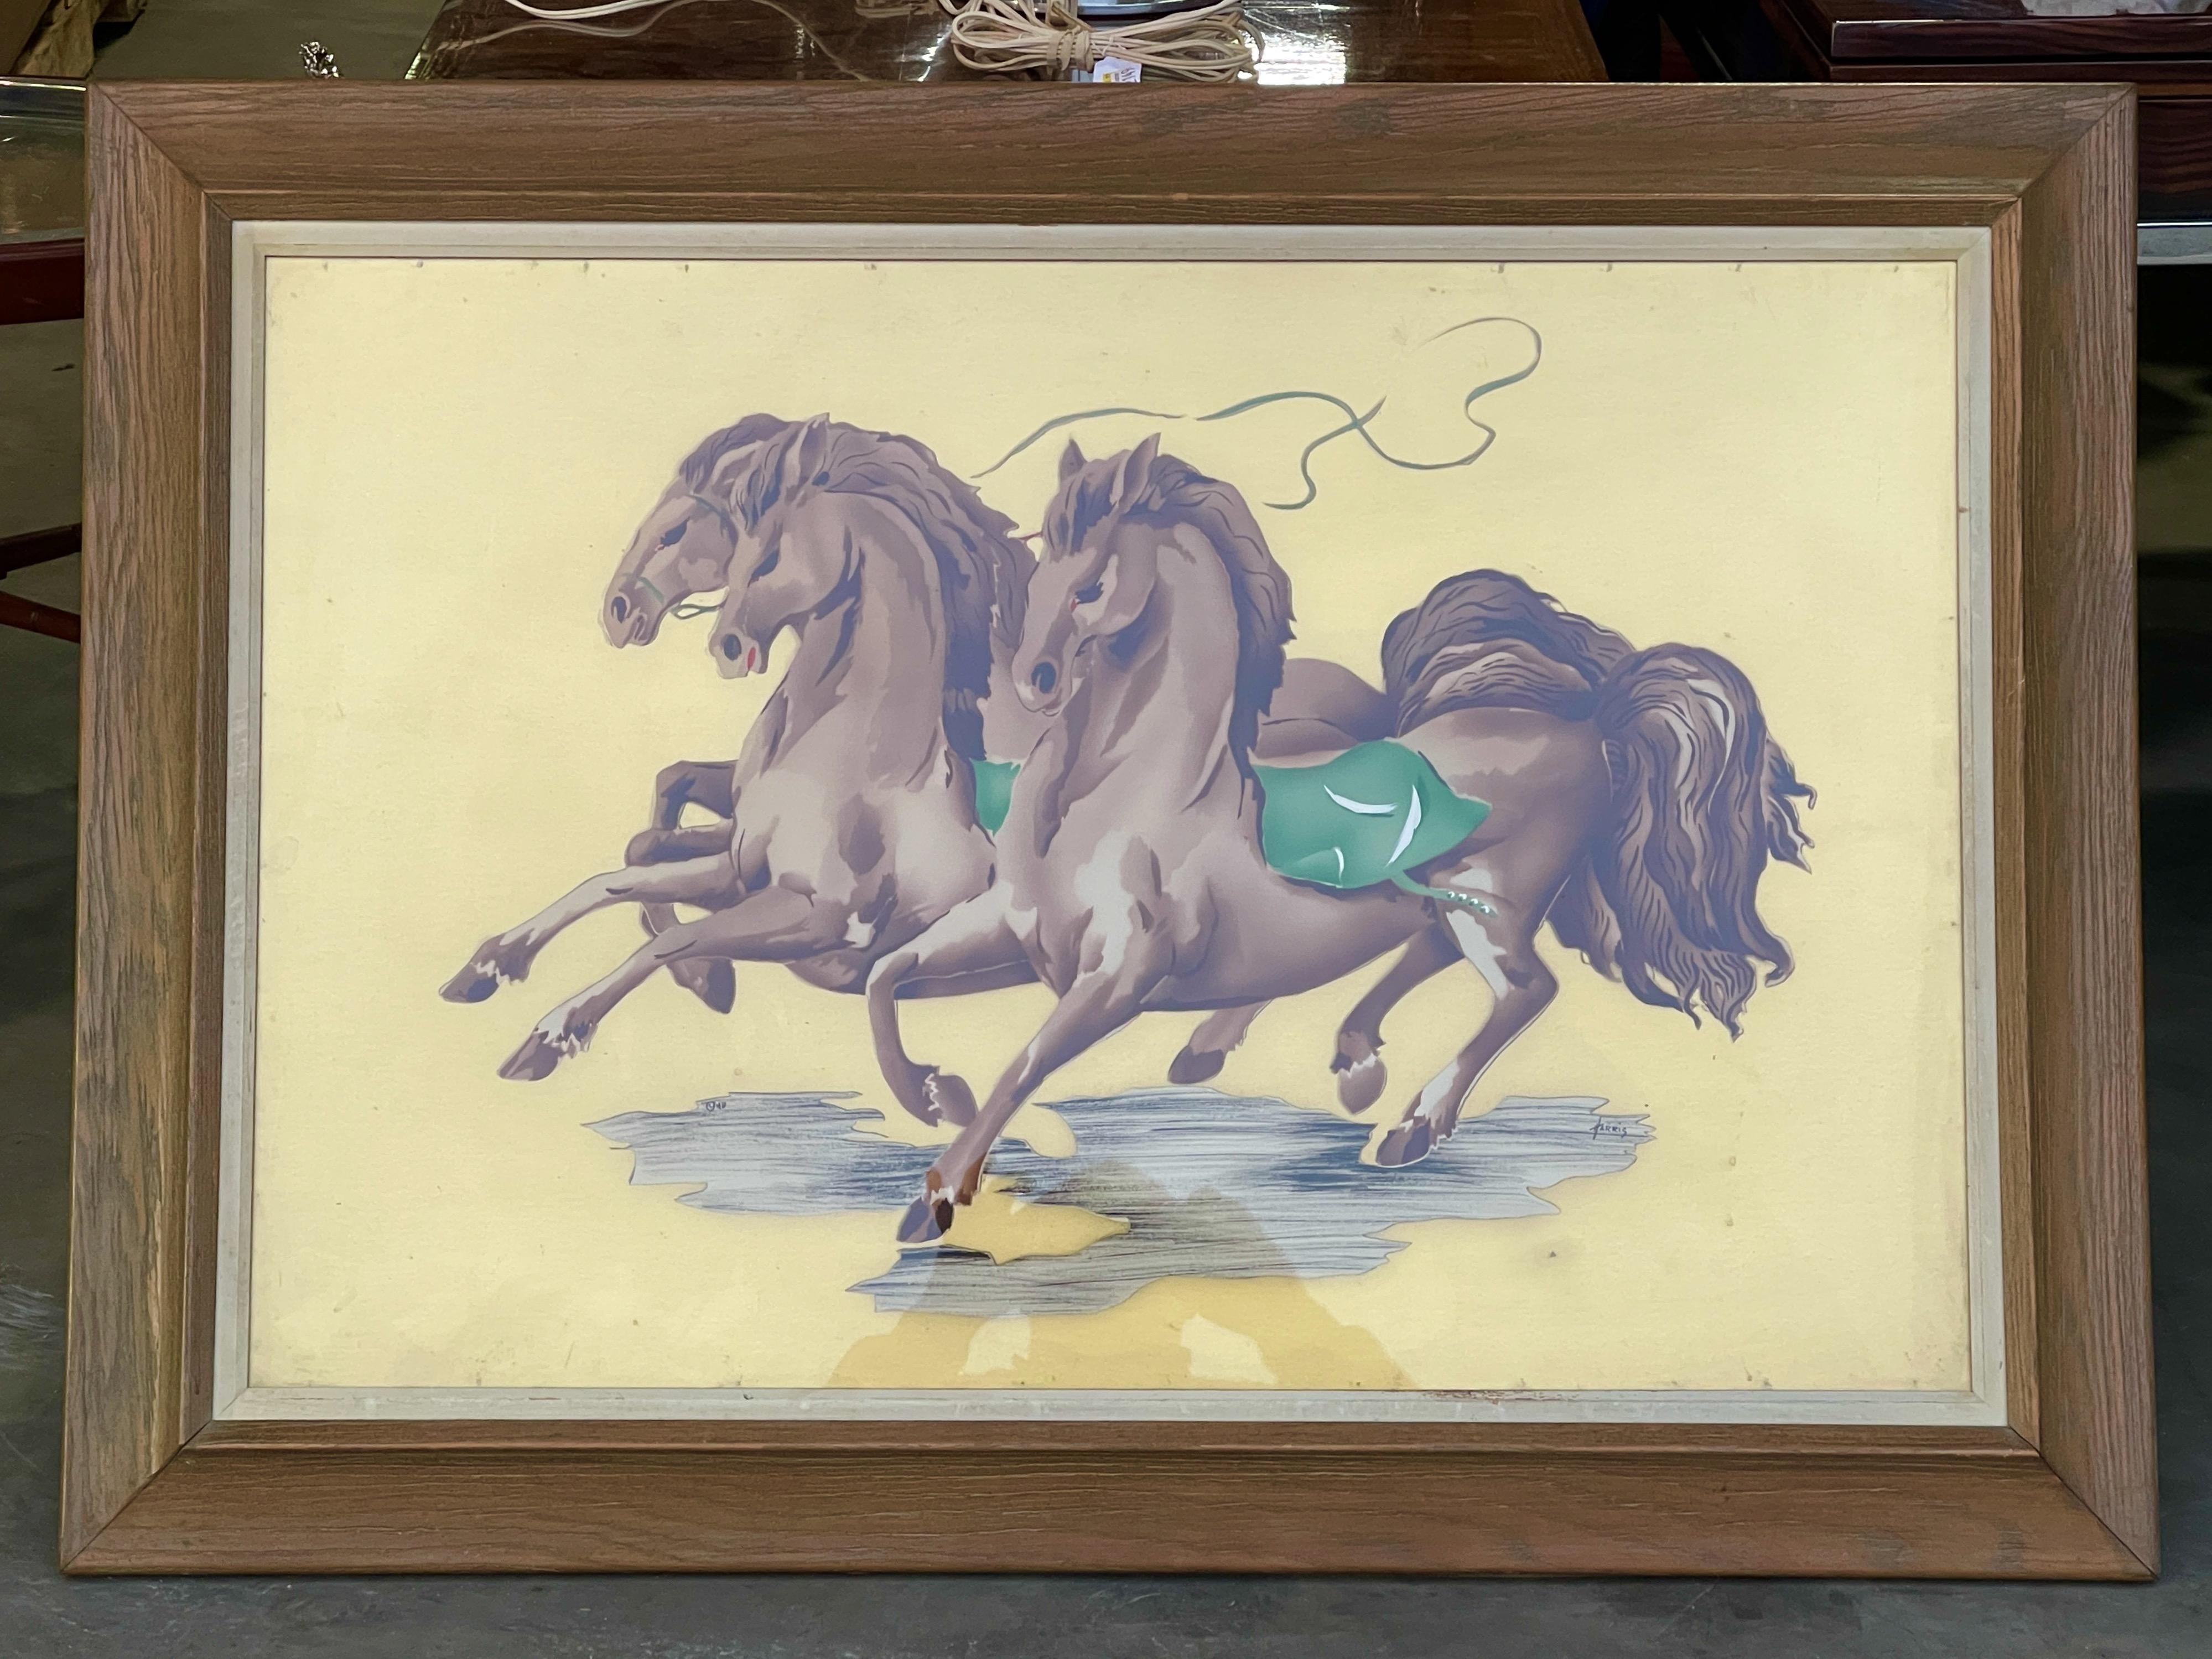 Galloping Horses, airbrushed watercolor by Benjamin Jorj Harris (American, 1904-1957) for Newman Decor.
Dimensions shown are for frame. Sight: 35.5 inches by 23.5 inches.
“Ben Jorj Harris” is actually the nom de brosse of the combined talents of